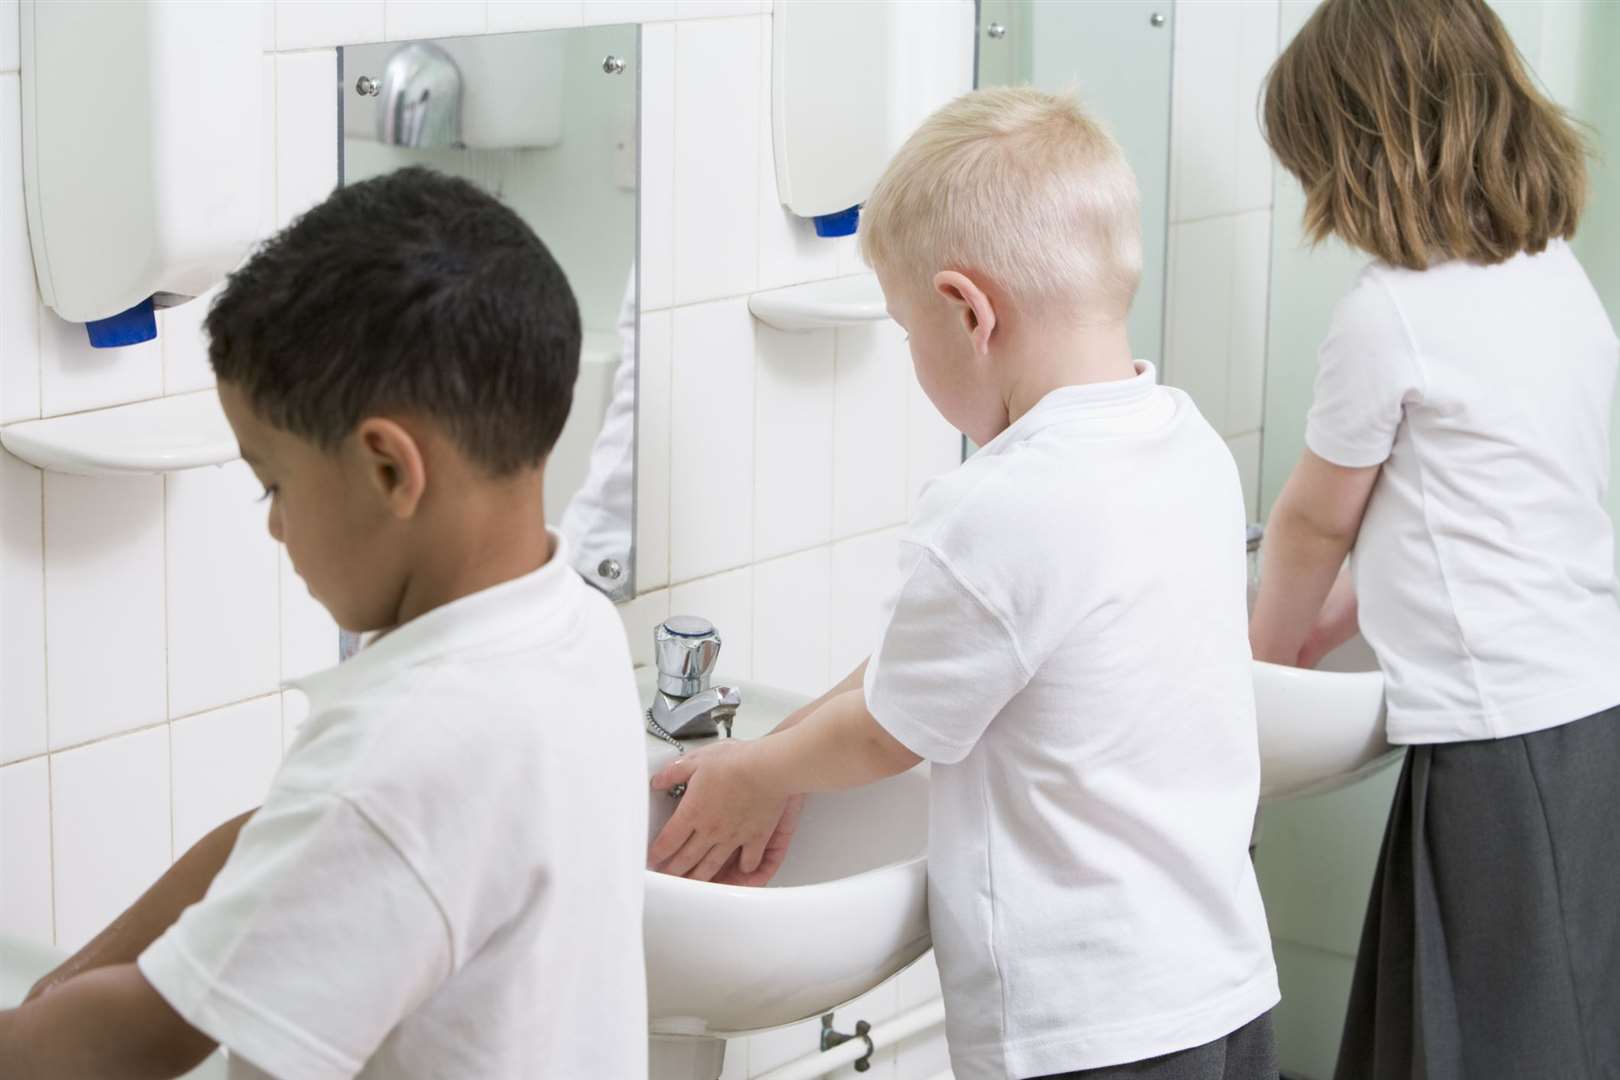 Children suffering with a pollen allergy should wash hands and faces frequently. Photo: Getty images.